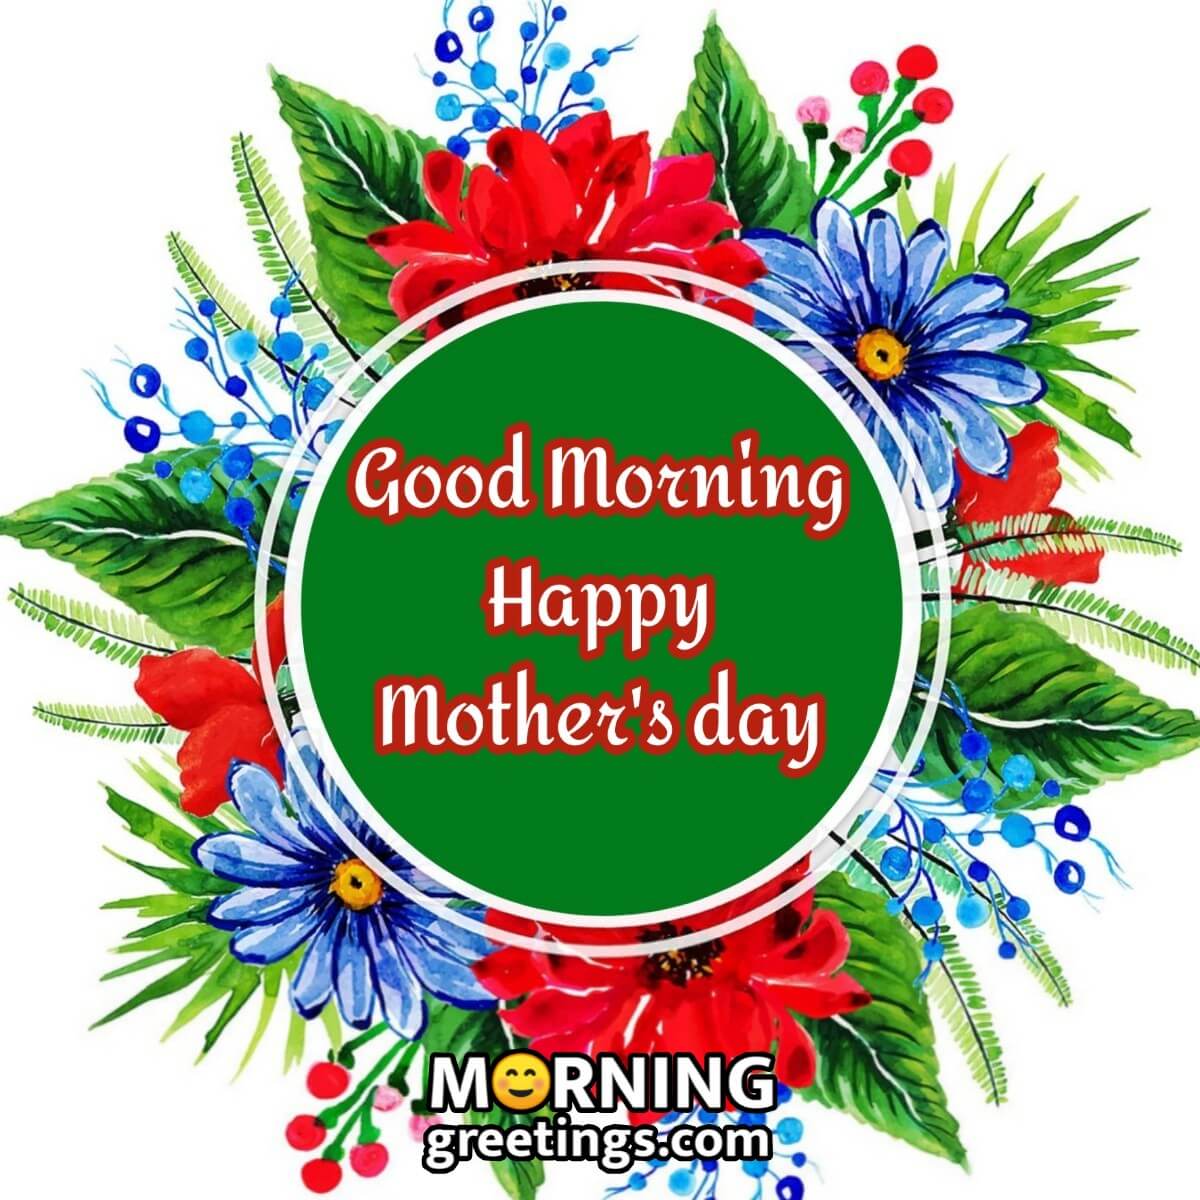 Good Morning Mother’s Day Green Floral Card